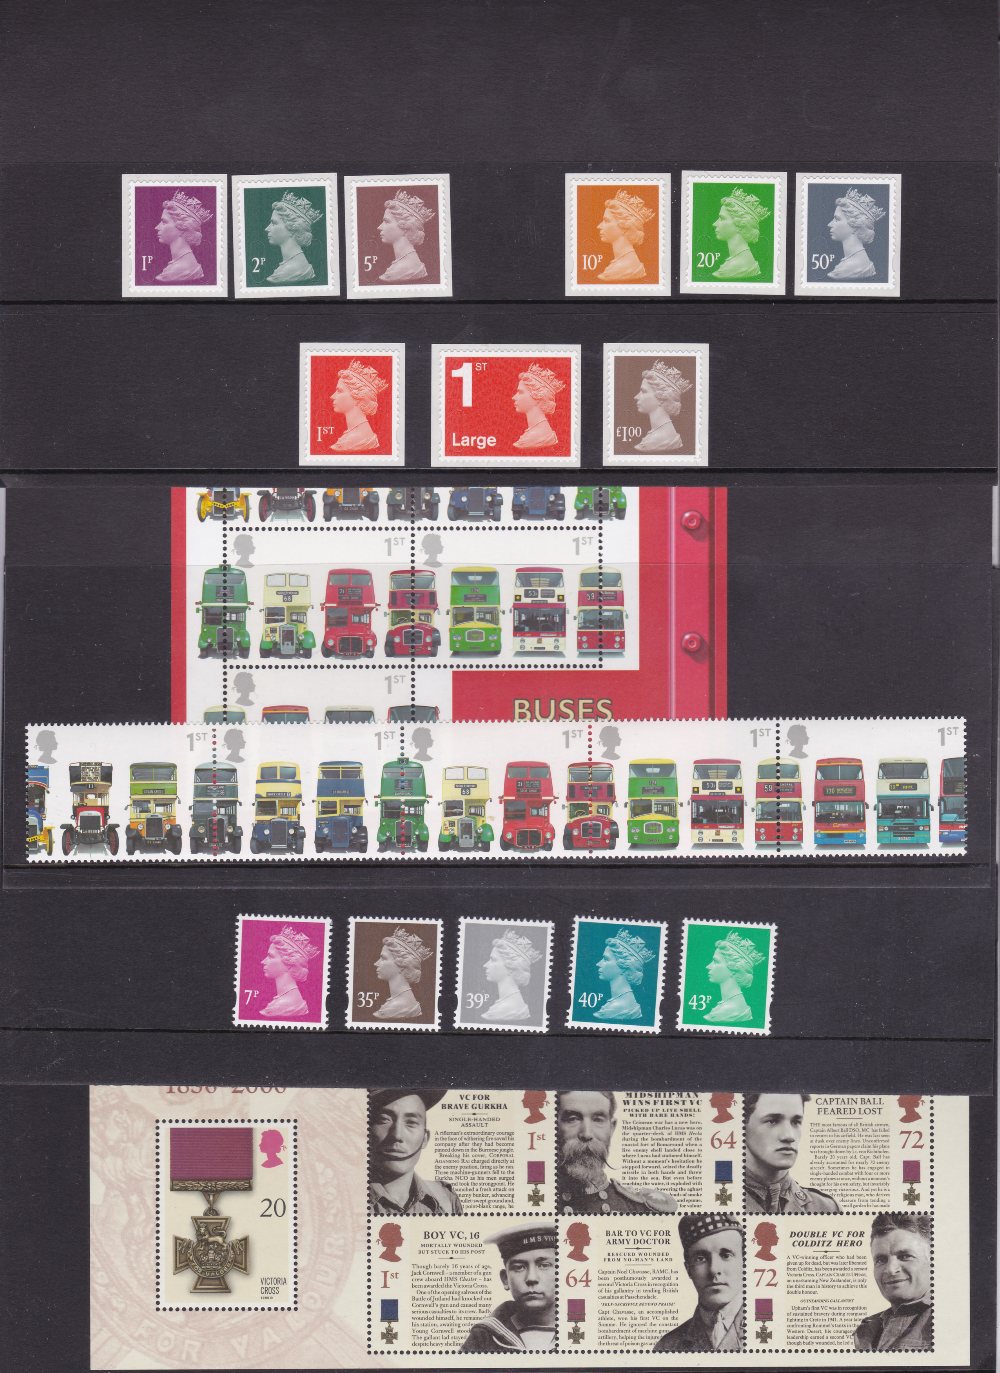 GREAT BRITAIN STAMPS : Small batch of mint stamps valid for postage, face value £49.